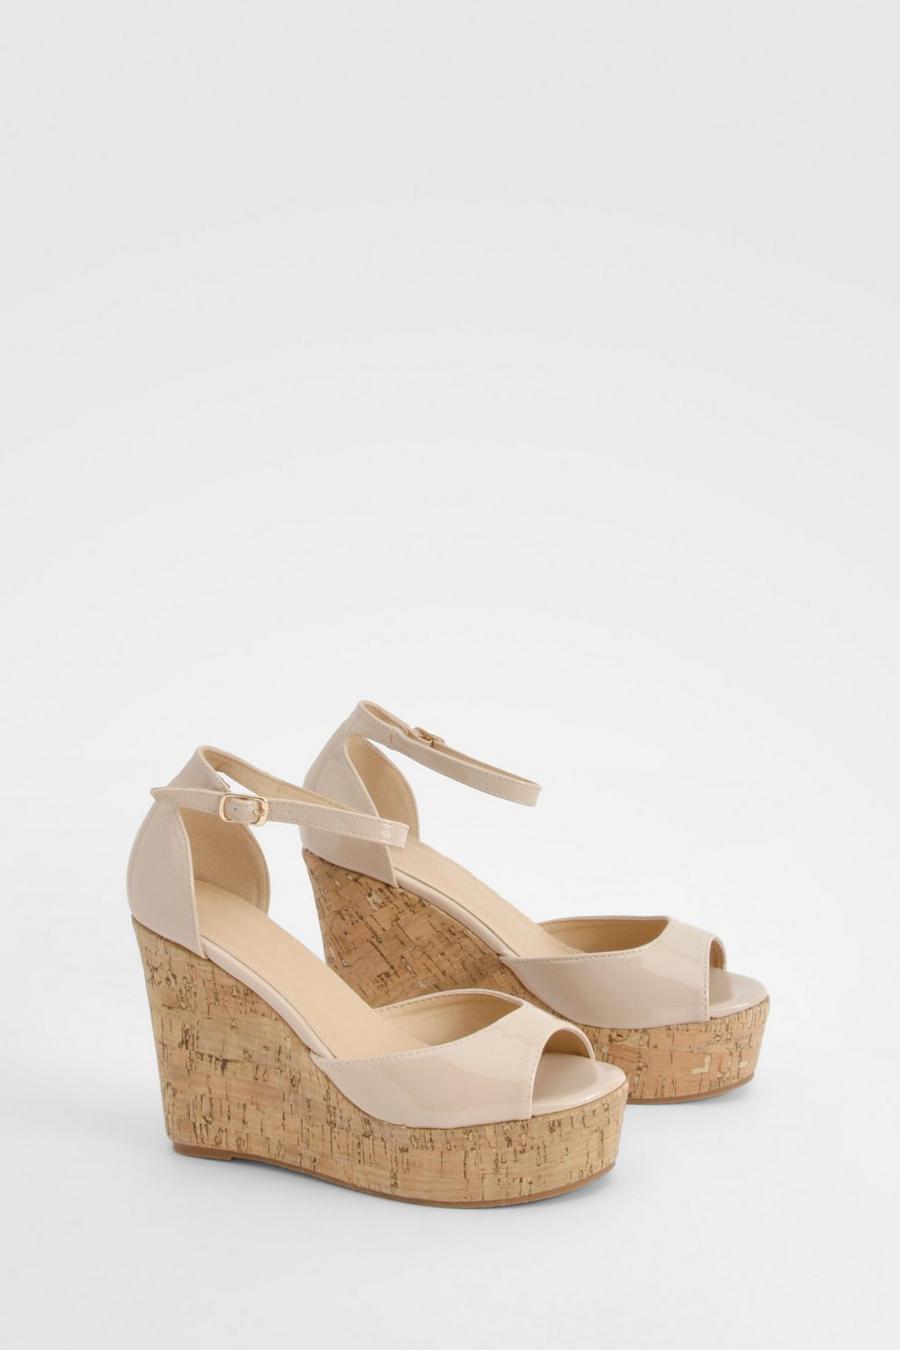 Nude Patent Cork Sole Wedges  